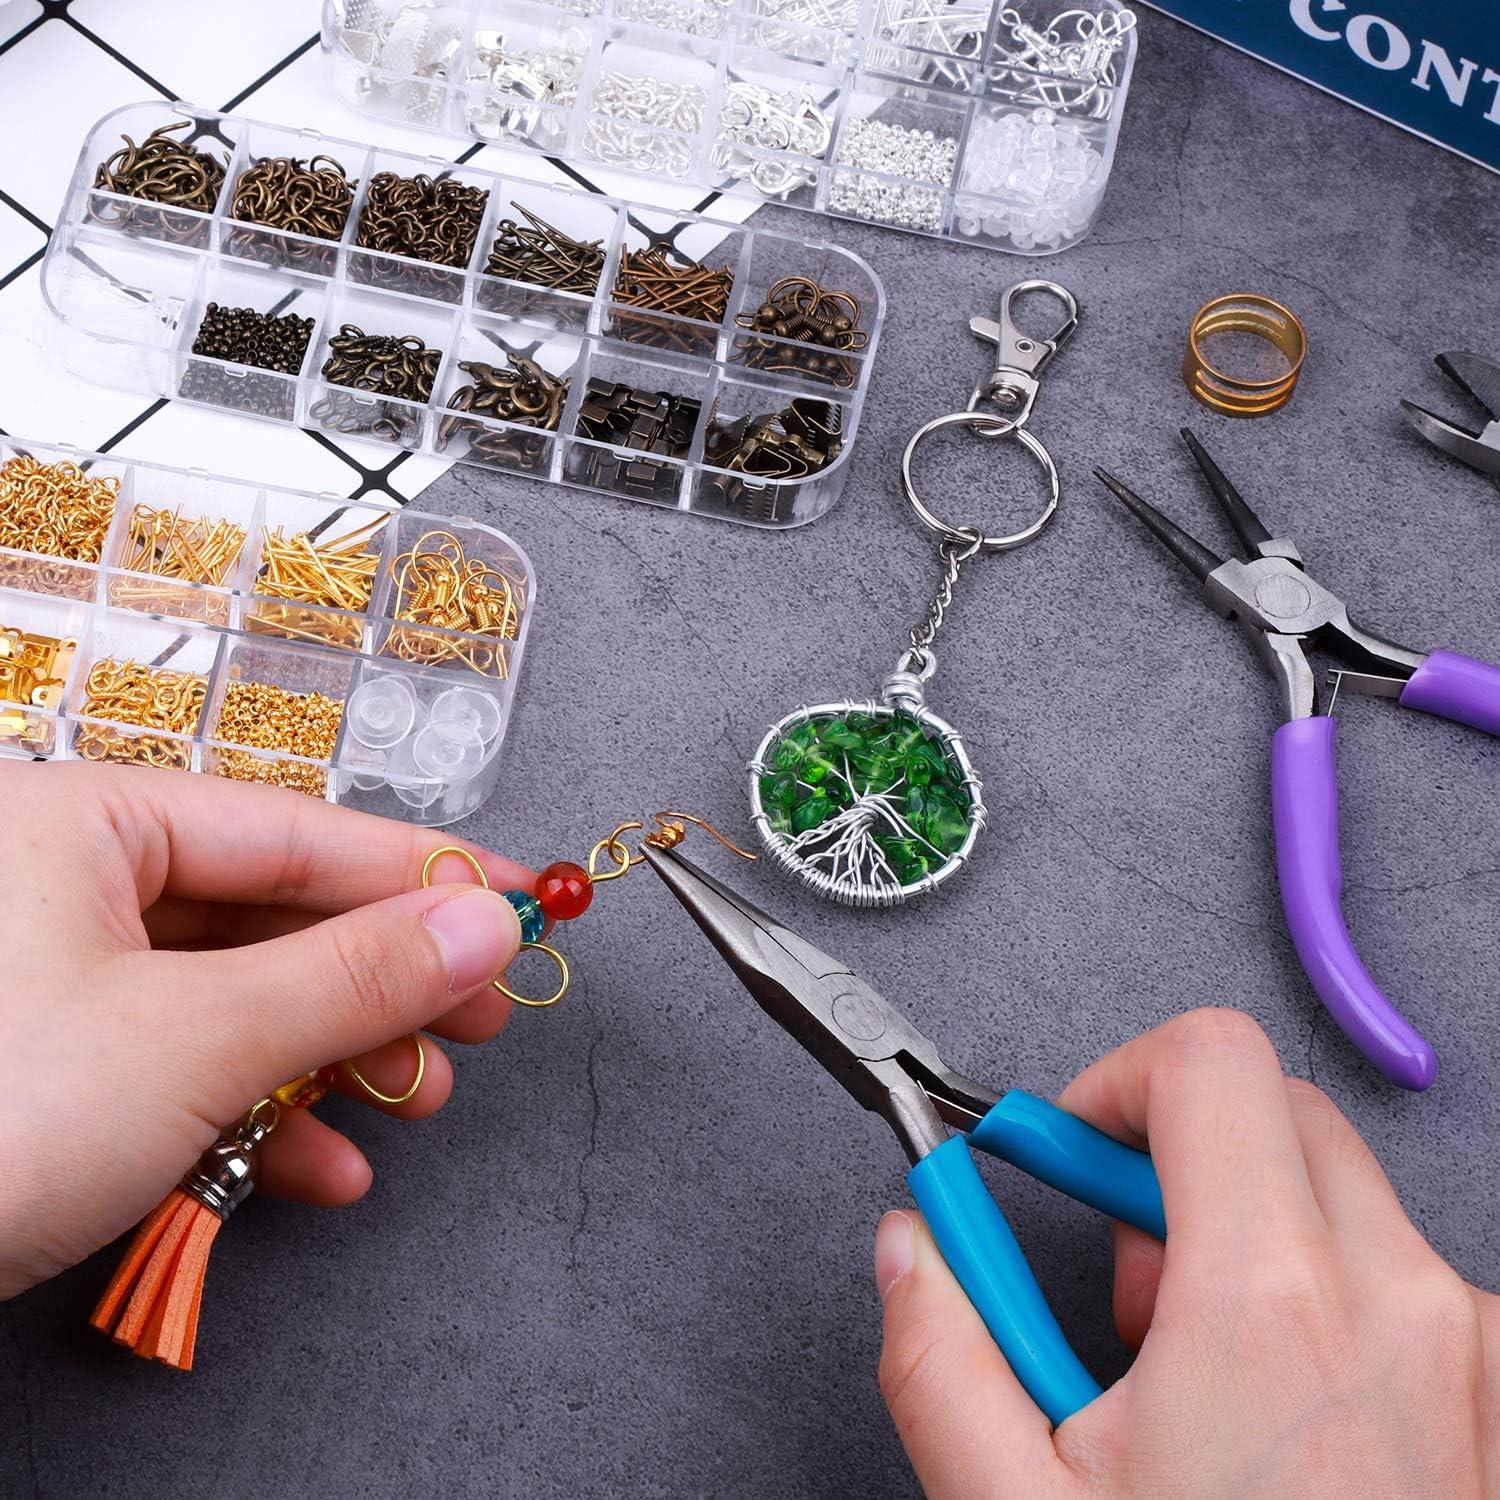 Jewelry Making Supplies Kit with Jewelry Tools, Wires and Findings